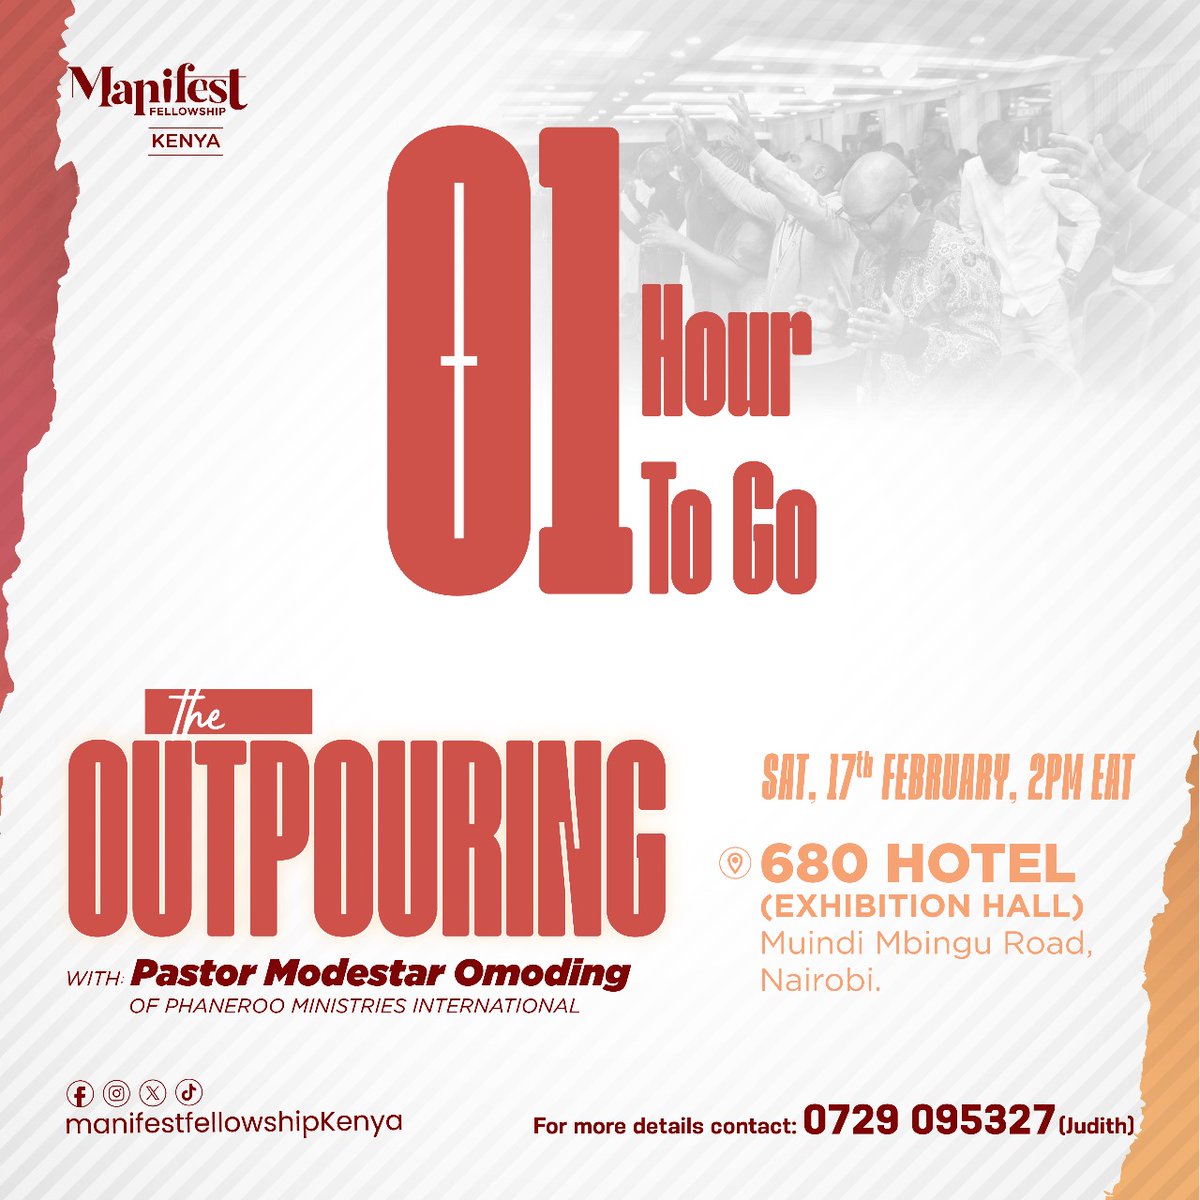 1 Hour To Go

#TheOutpouring
#BringAFriend